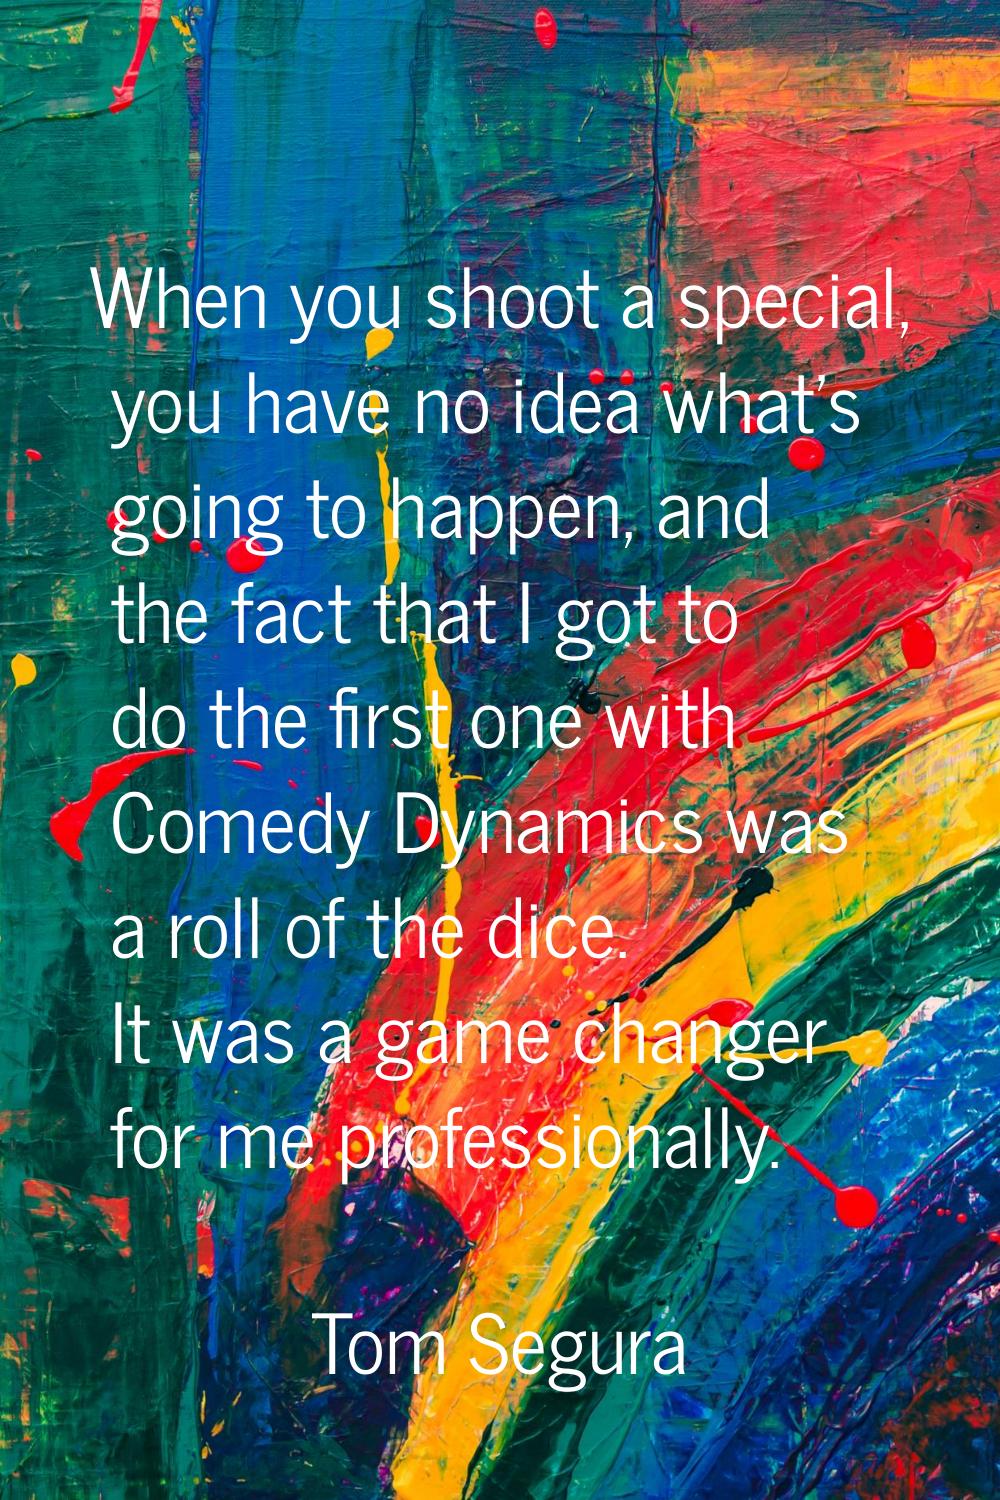 When you shoot a special, you have no idea what's going to happen, and the fact that I got to do th